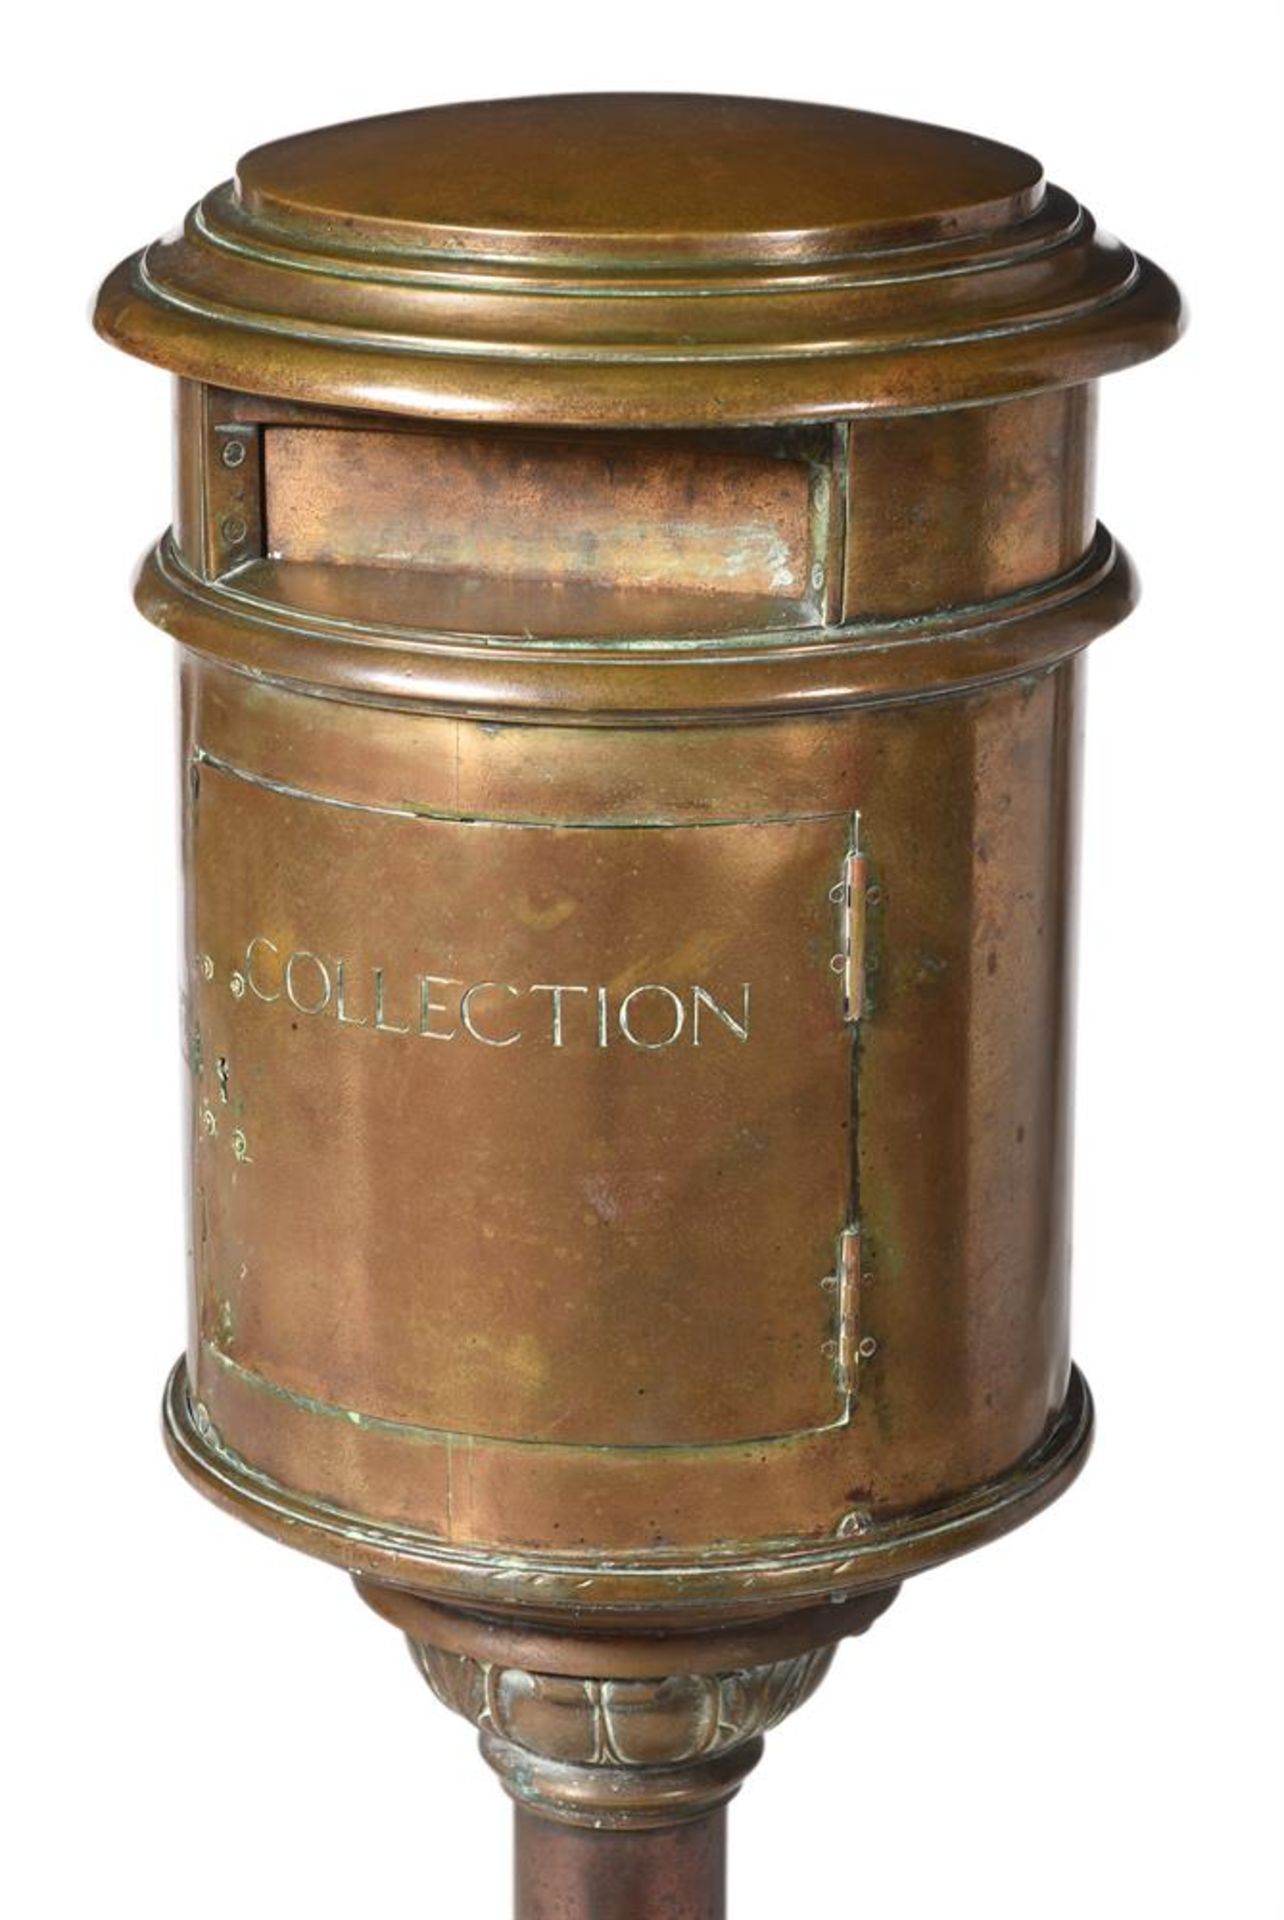 AN UNUSUAL PAIR OF BRASS AND OAK HOTEL OR COUNTRY HOUSE POST BOXES, EARLY 20TH CENTURY - Image 2 of 3